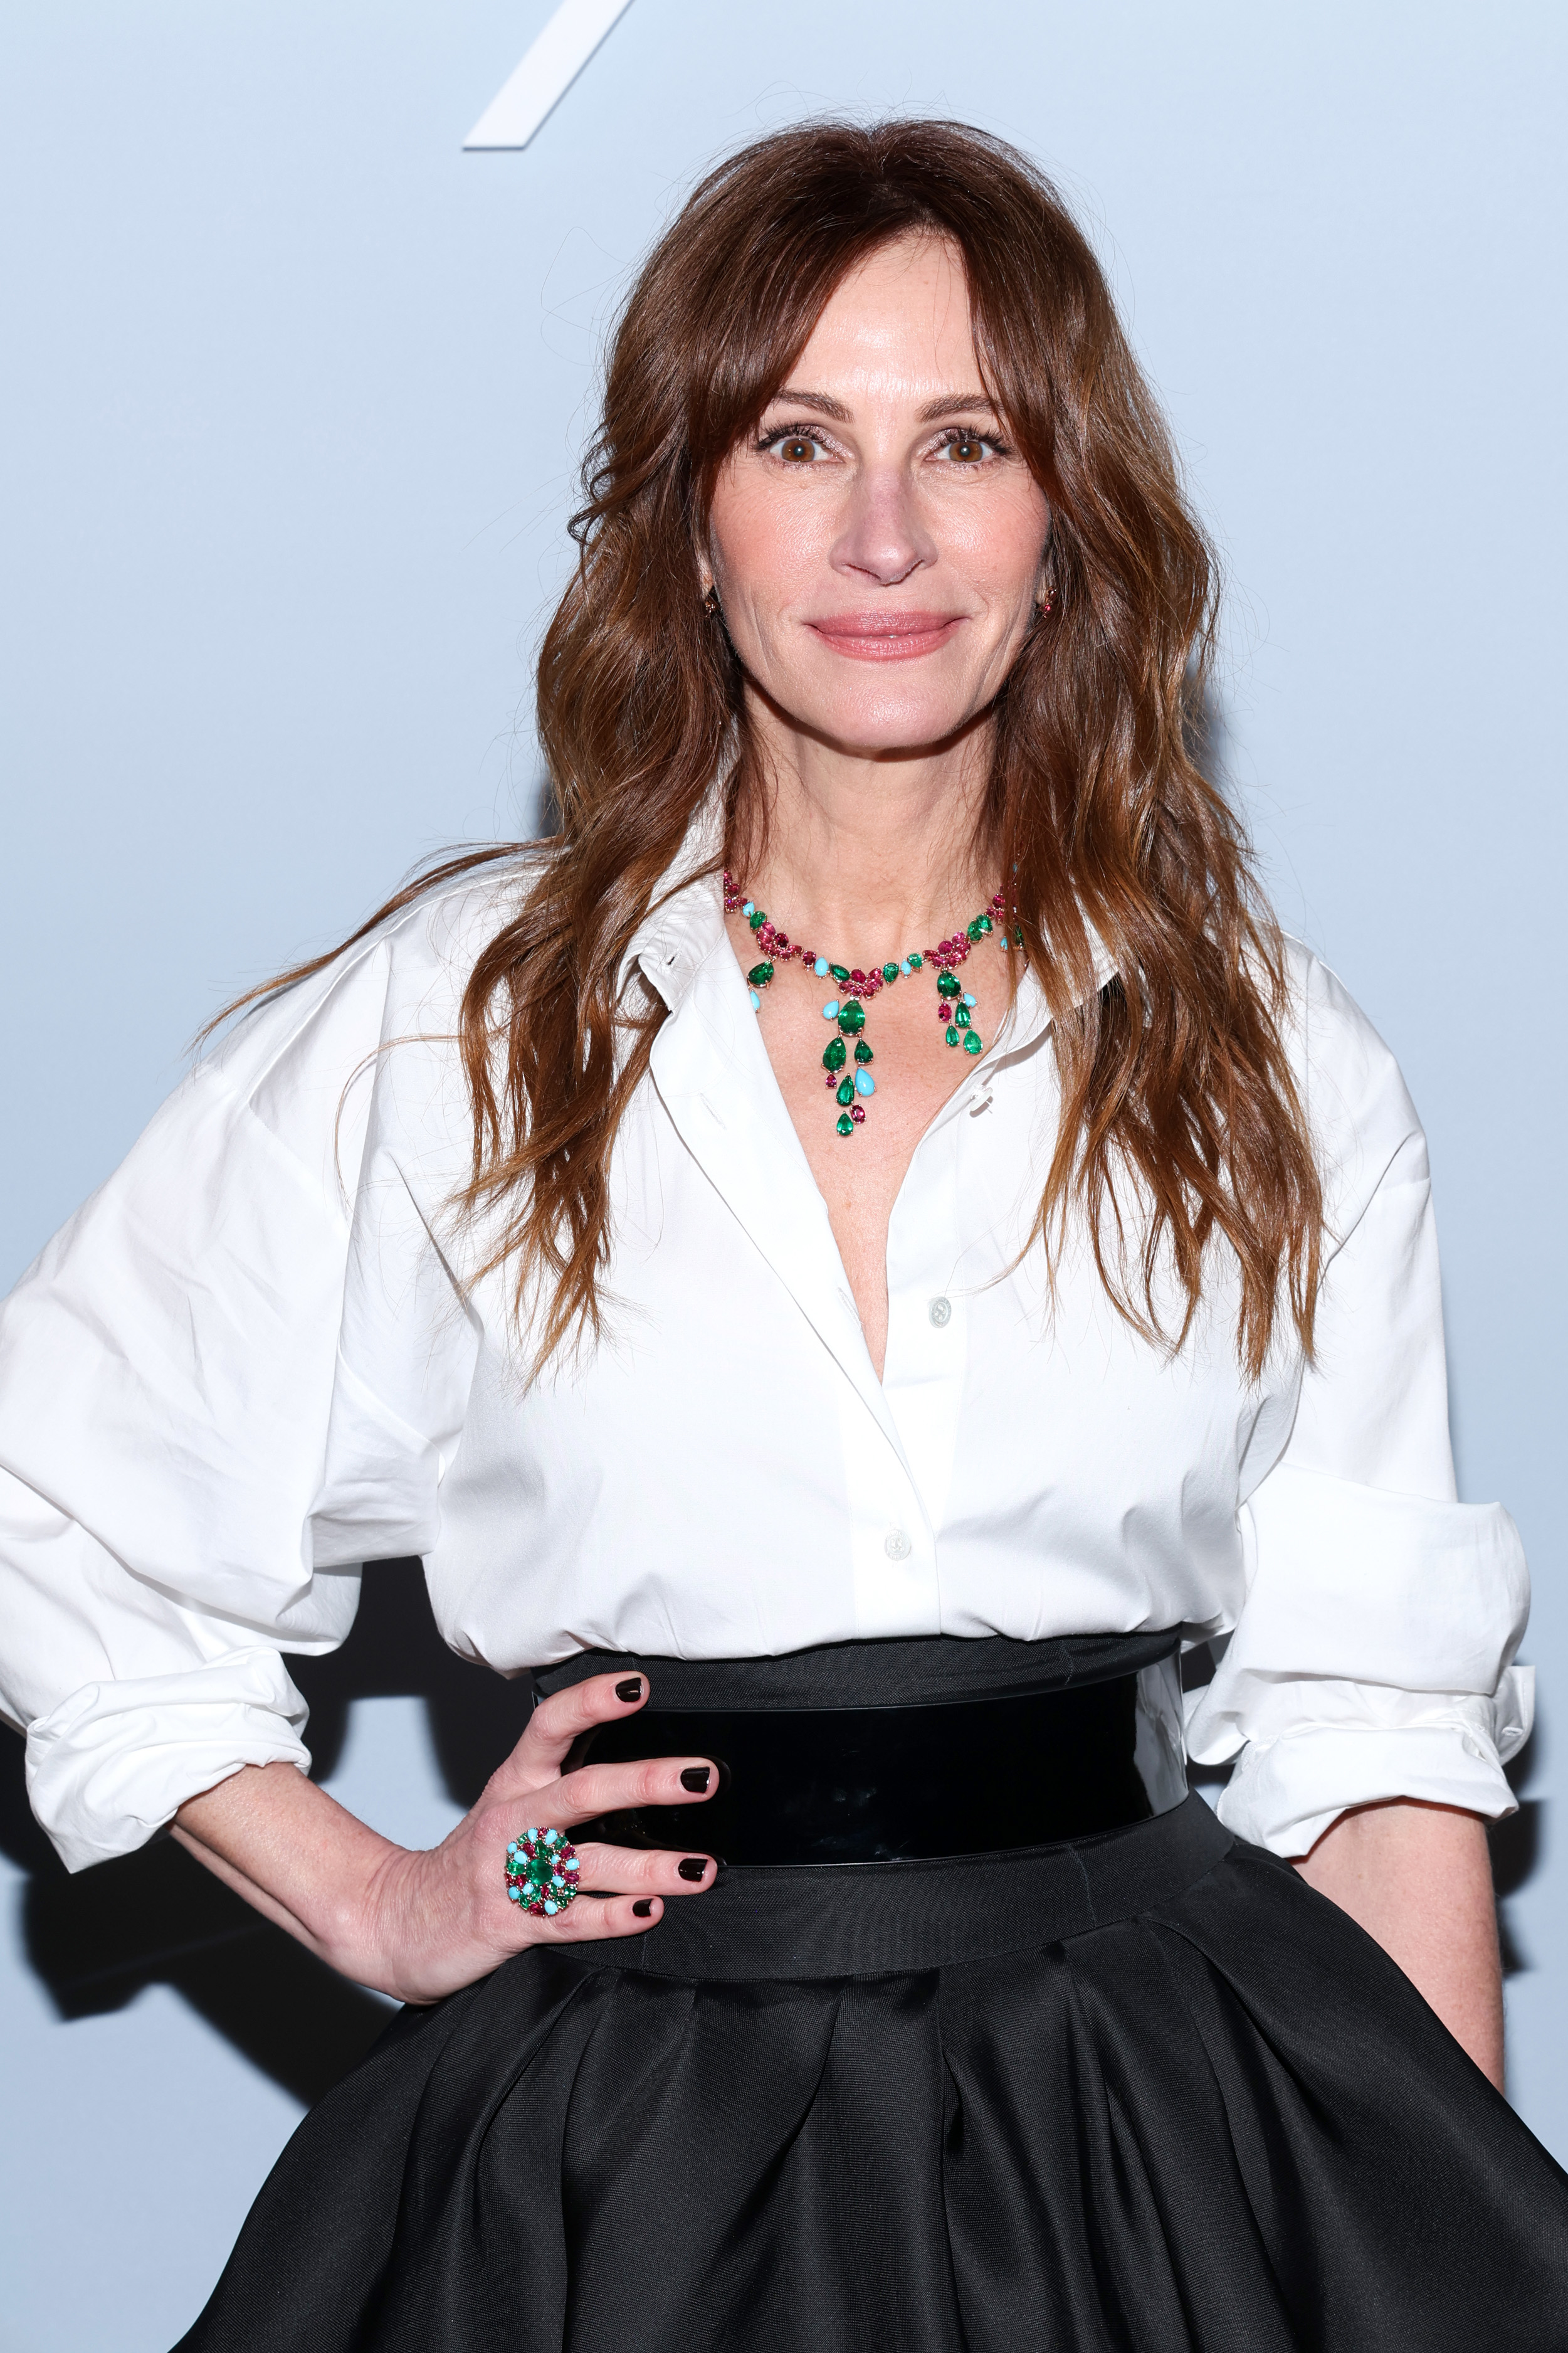 Julia Roberts in a white blouse and black skirt, with hands on hips, accessorized with green jewelry